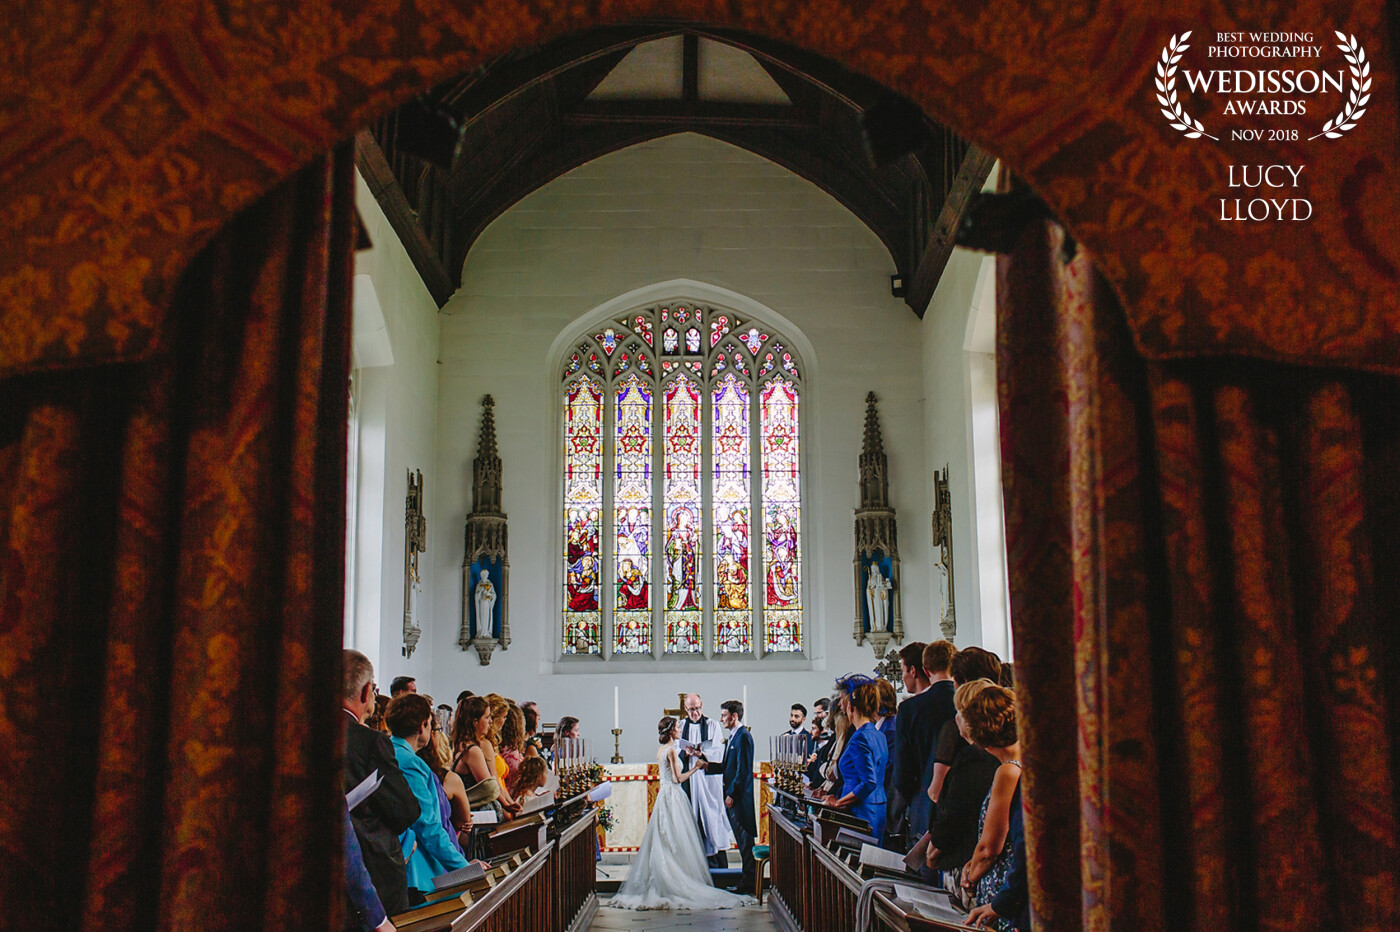 A wonderful moment during the Ceremony at the very beautiful Magdelene College Cambridge. There was very little room for me to stand at the front to capture the ceremony, but as the scene from the back looked so stunning - so I didn't mind. 